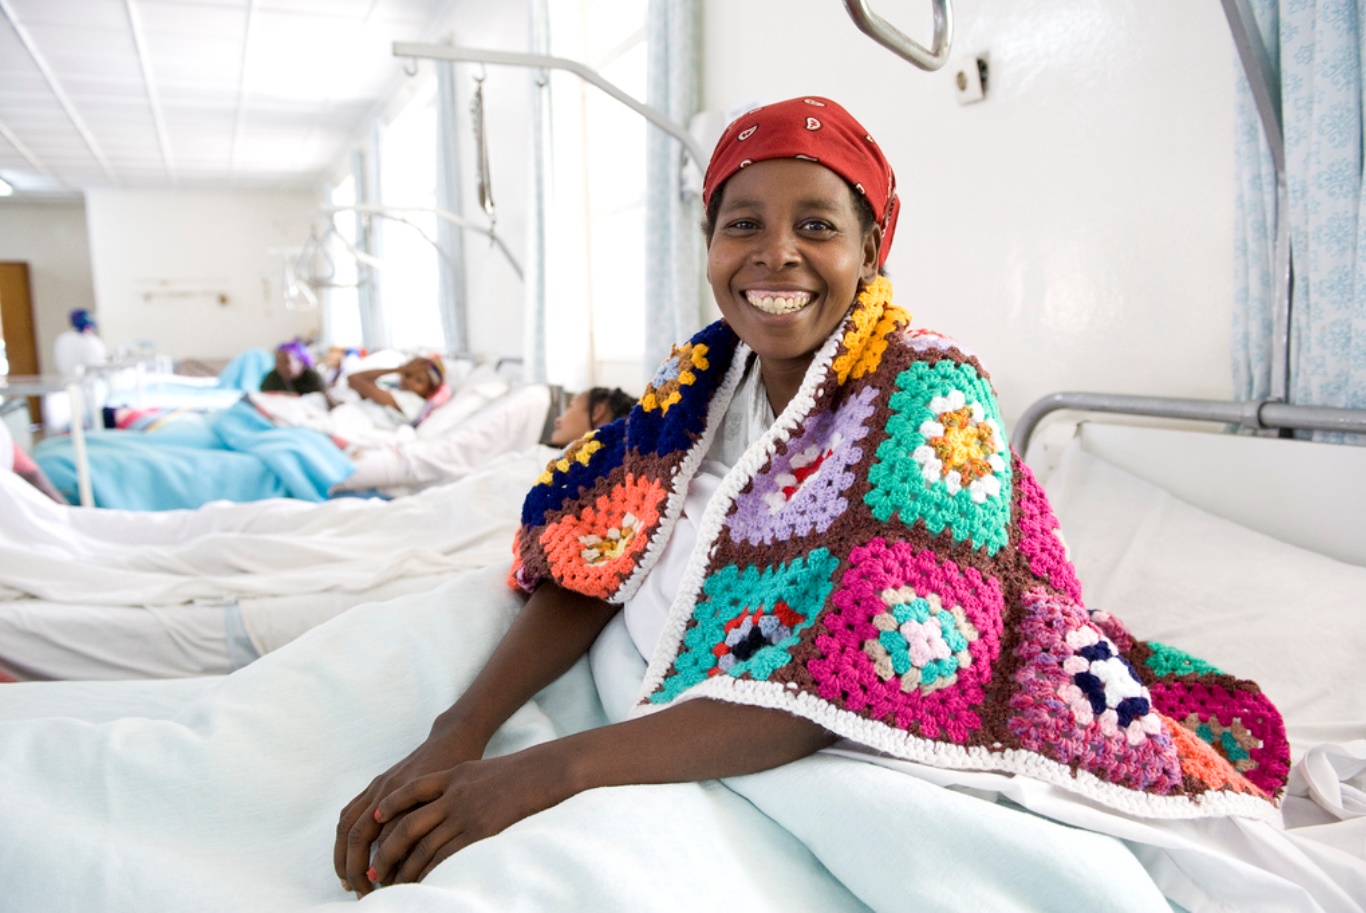 woman smiling in hospital